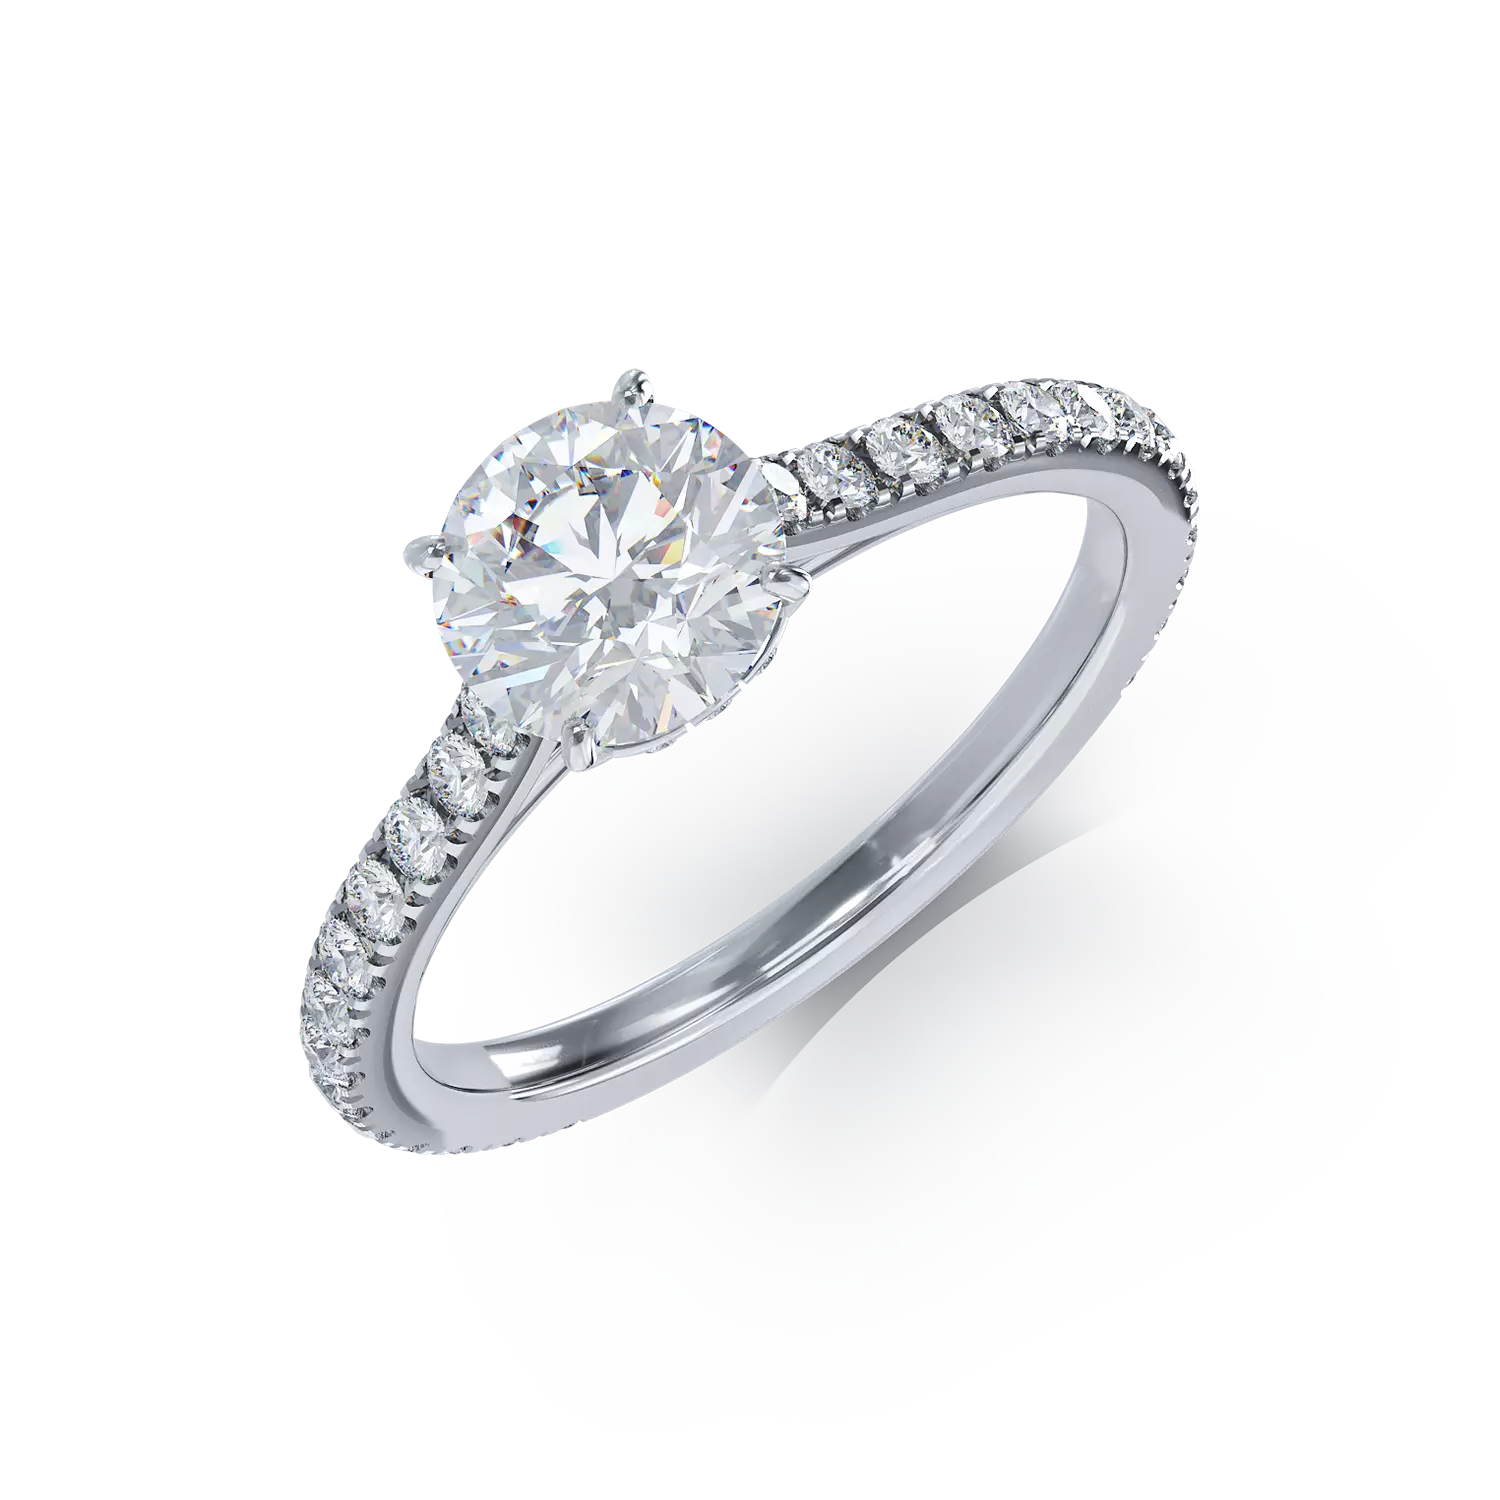 White gold engagement ring with 1.02ct diamond and 0.54ct diamonds